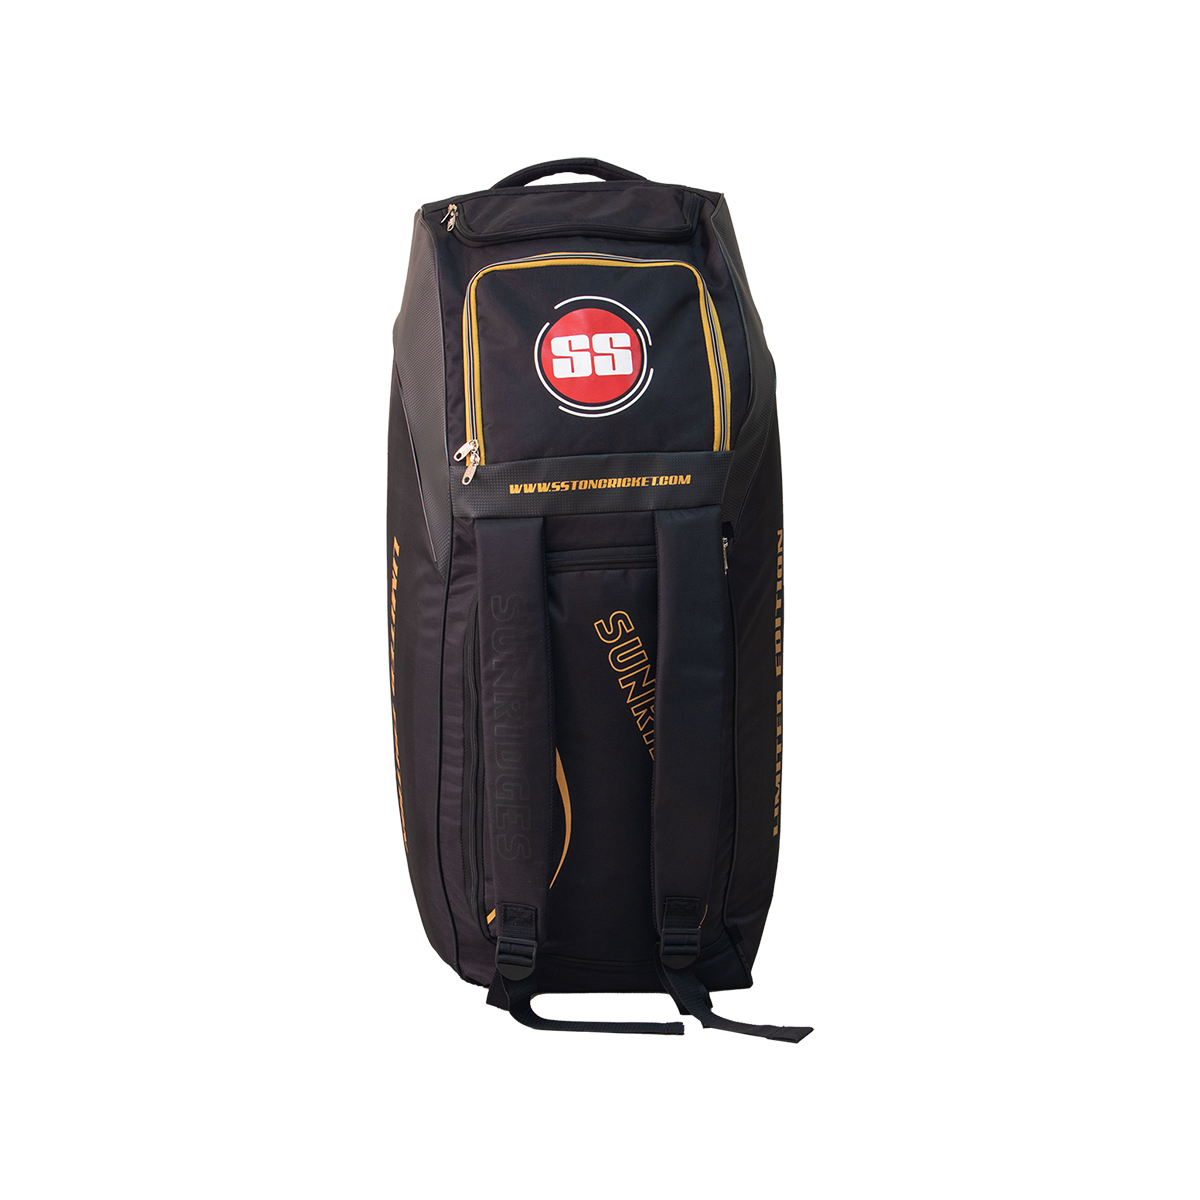 SS DK Finisher Cricket Duffle Bag With Wheels